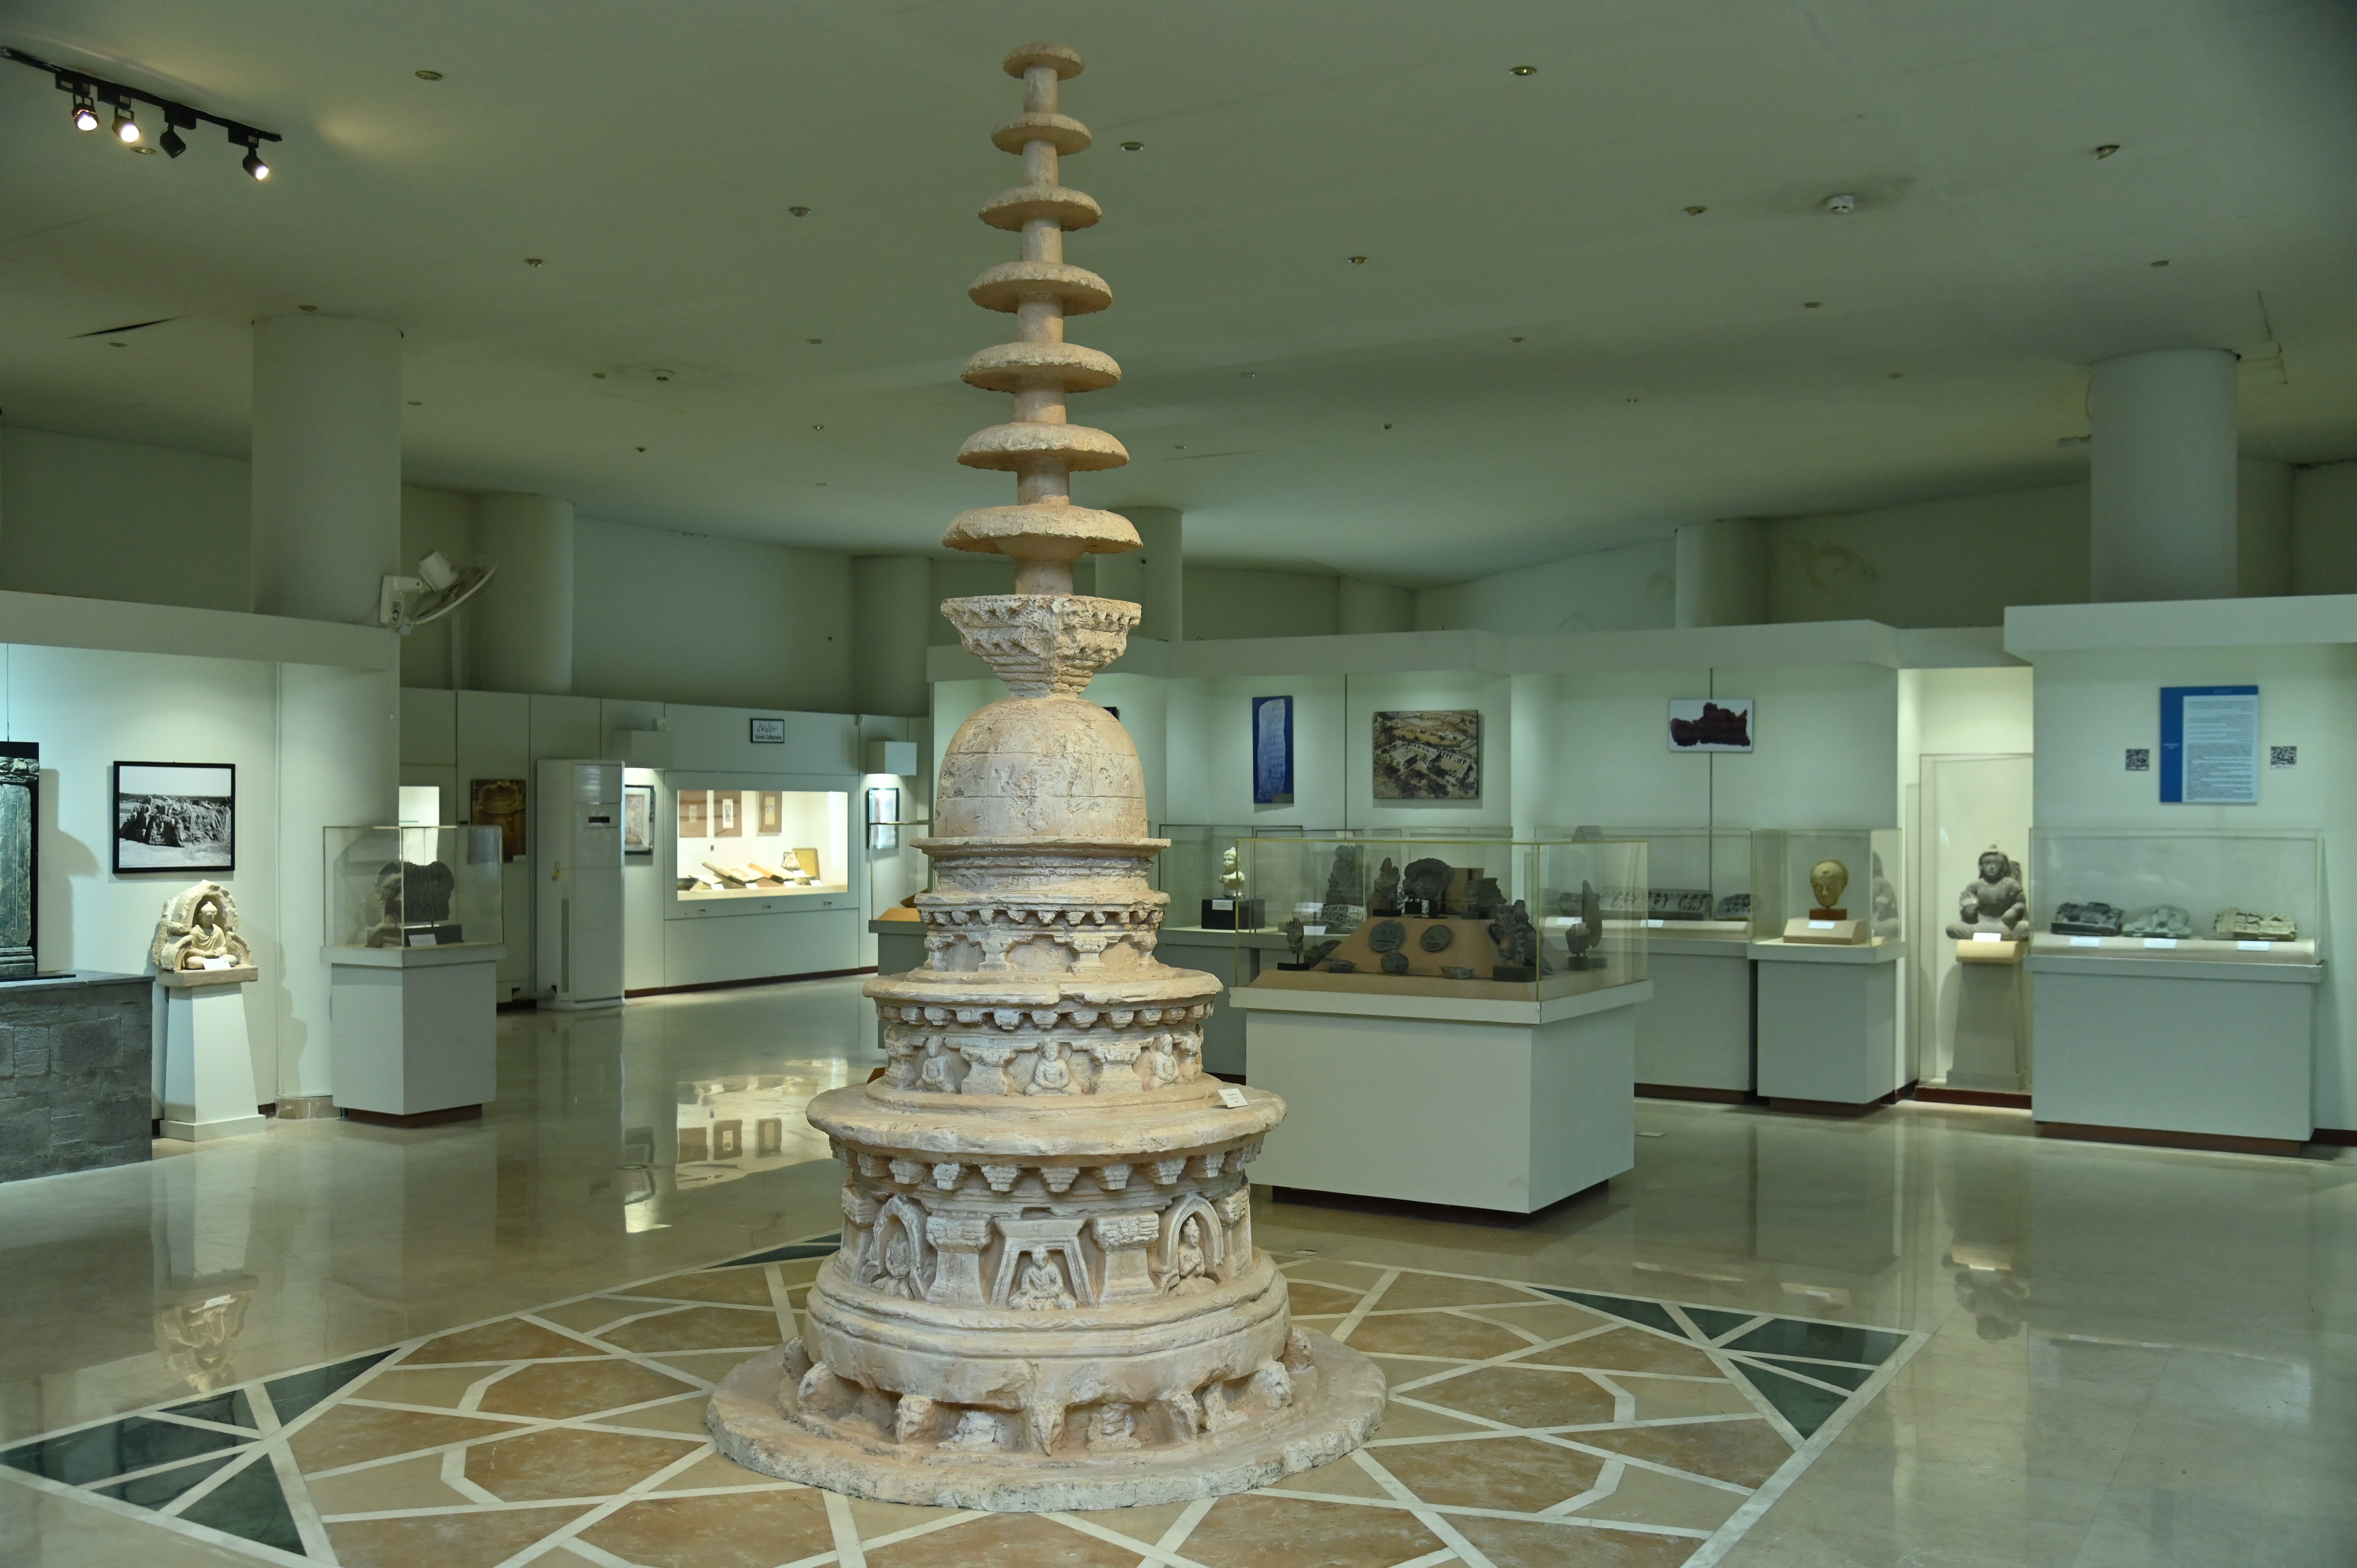 The Replica of Mohra Moradu Votive Stupa in Sir Syed Memorial Museum which is originally 4m (13 ft) tall